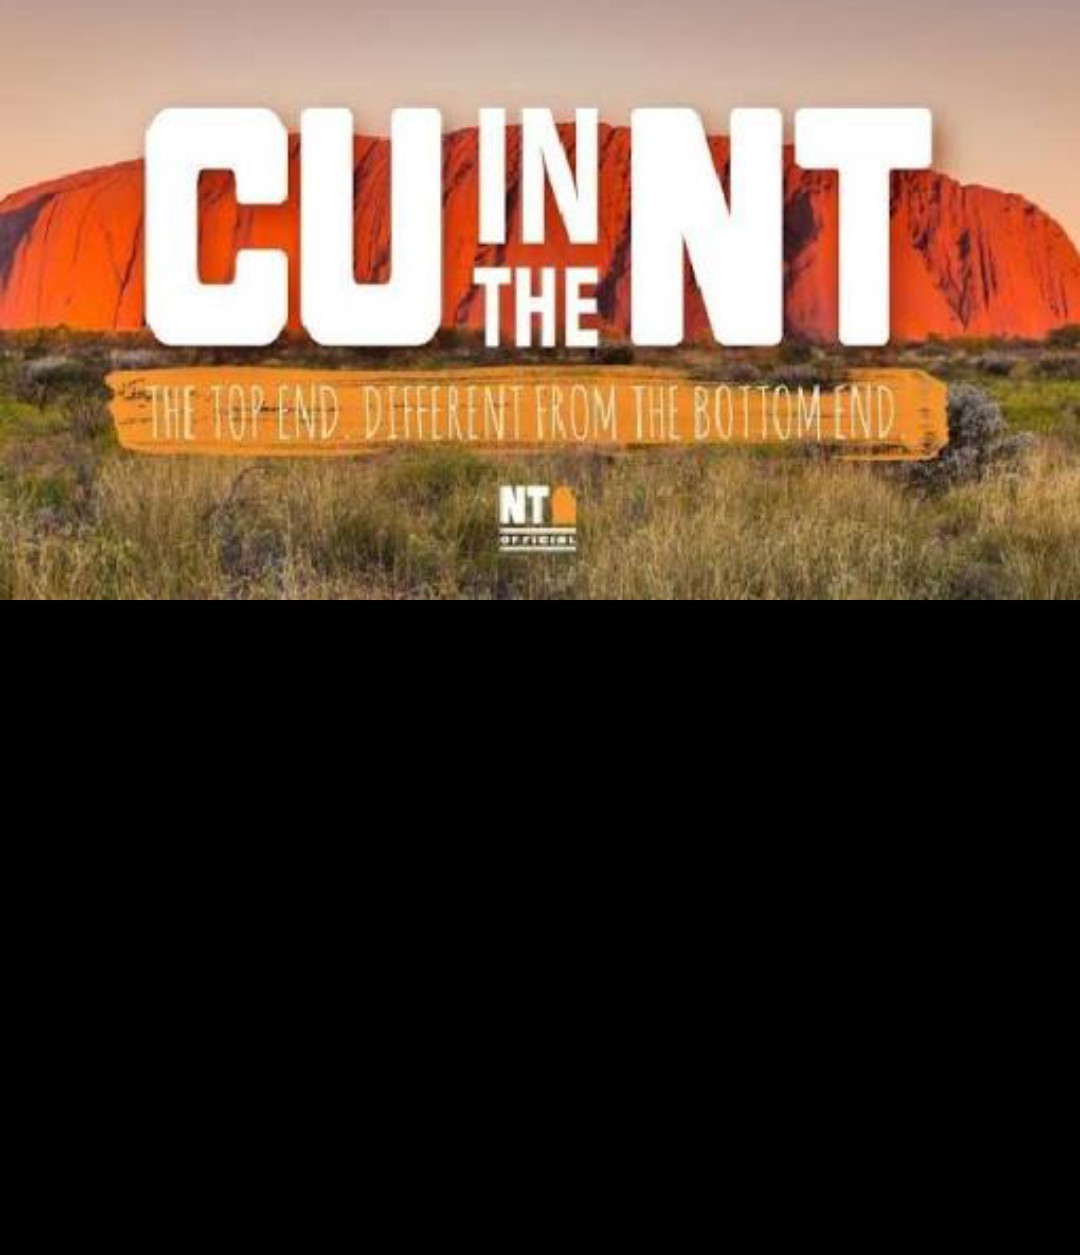 Tourism add for Northern Territory in Australia - meme